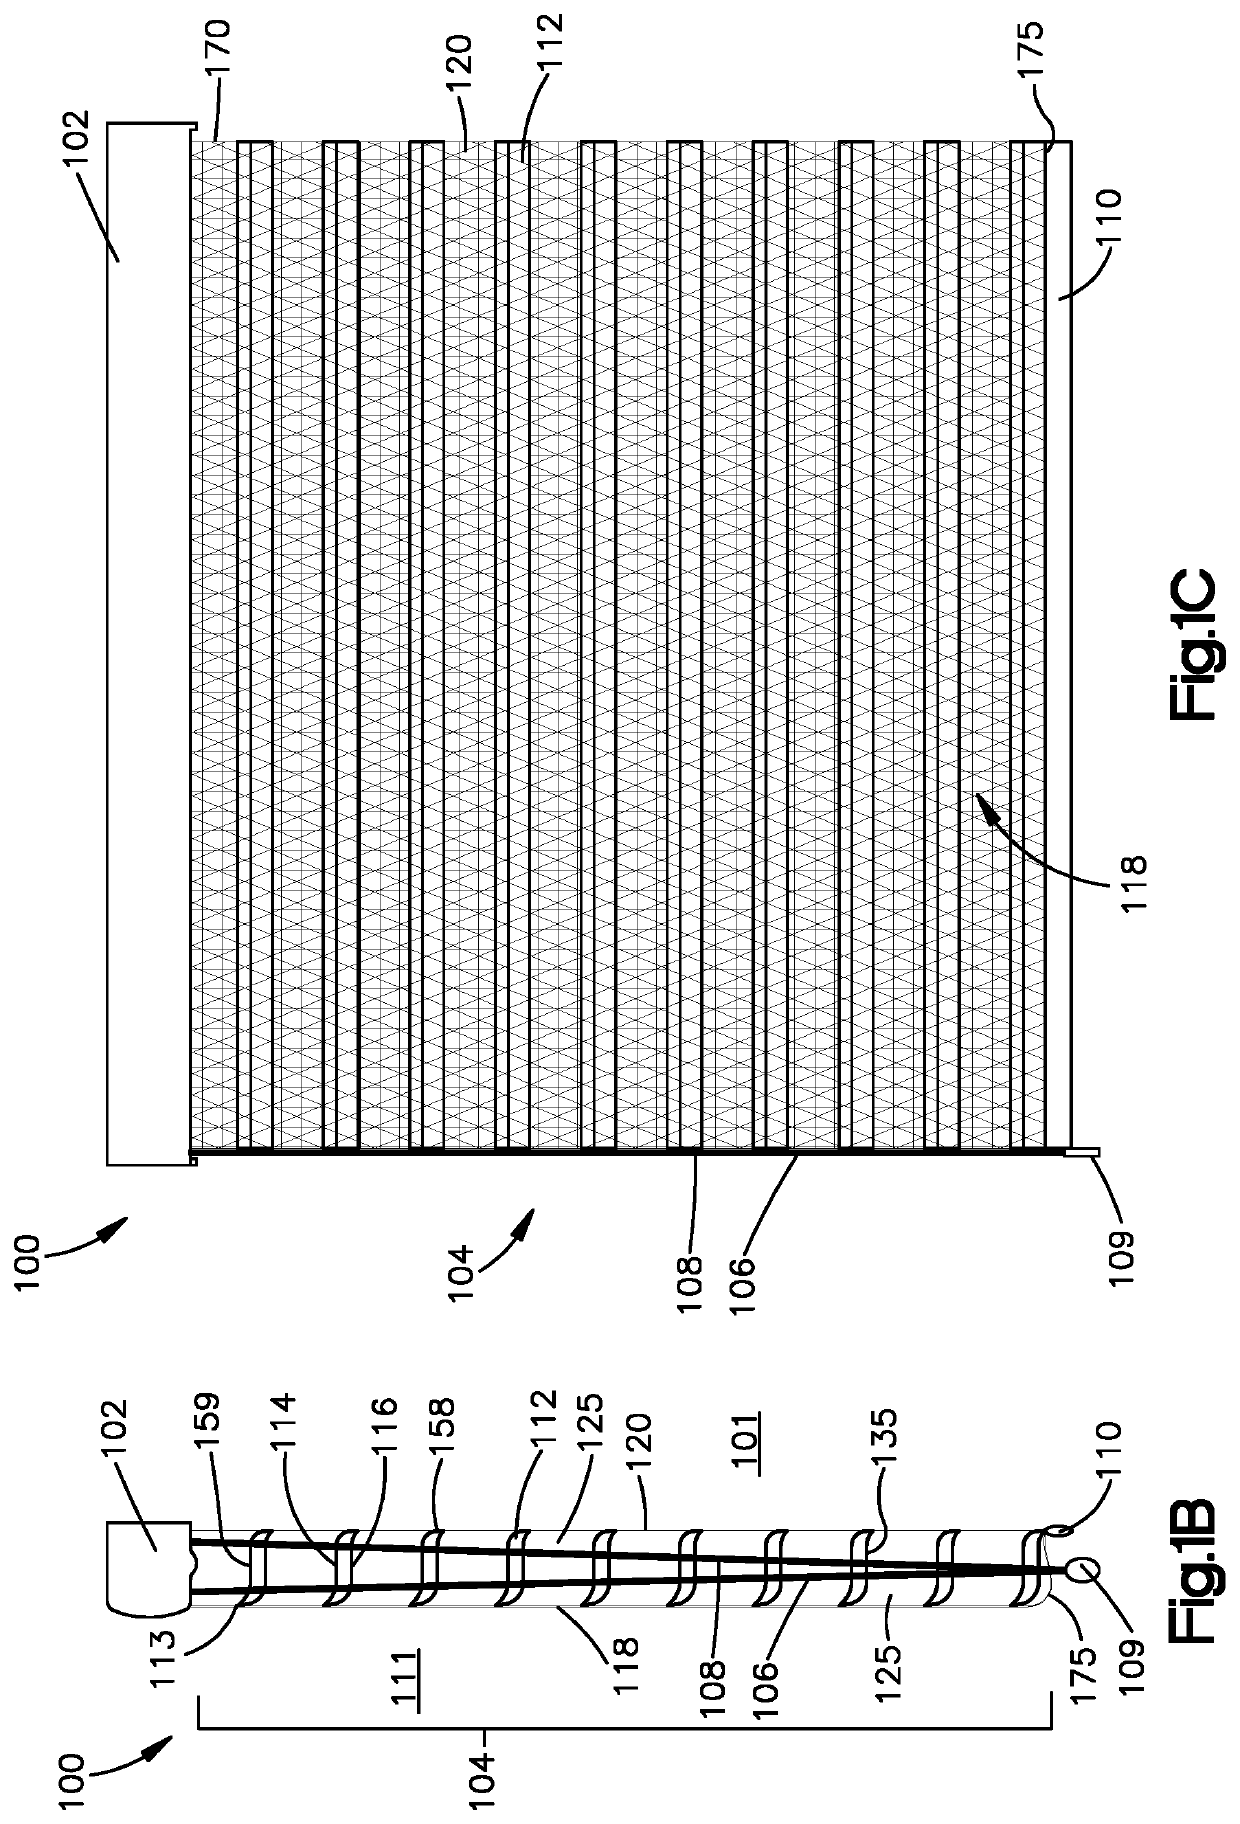 Covering for architectural features, related systems, and methods of manufacture